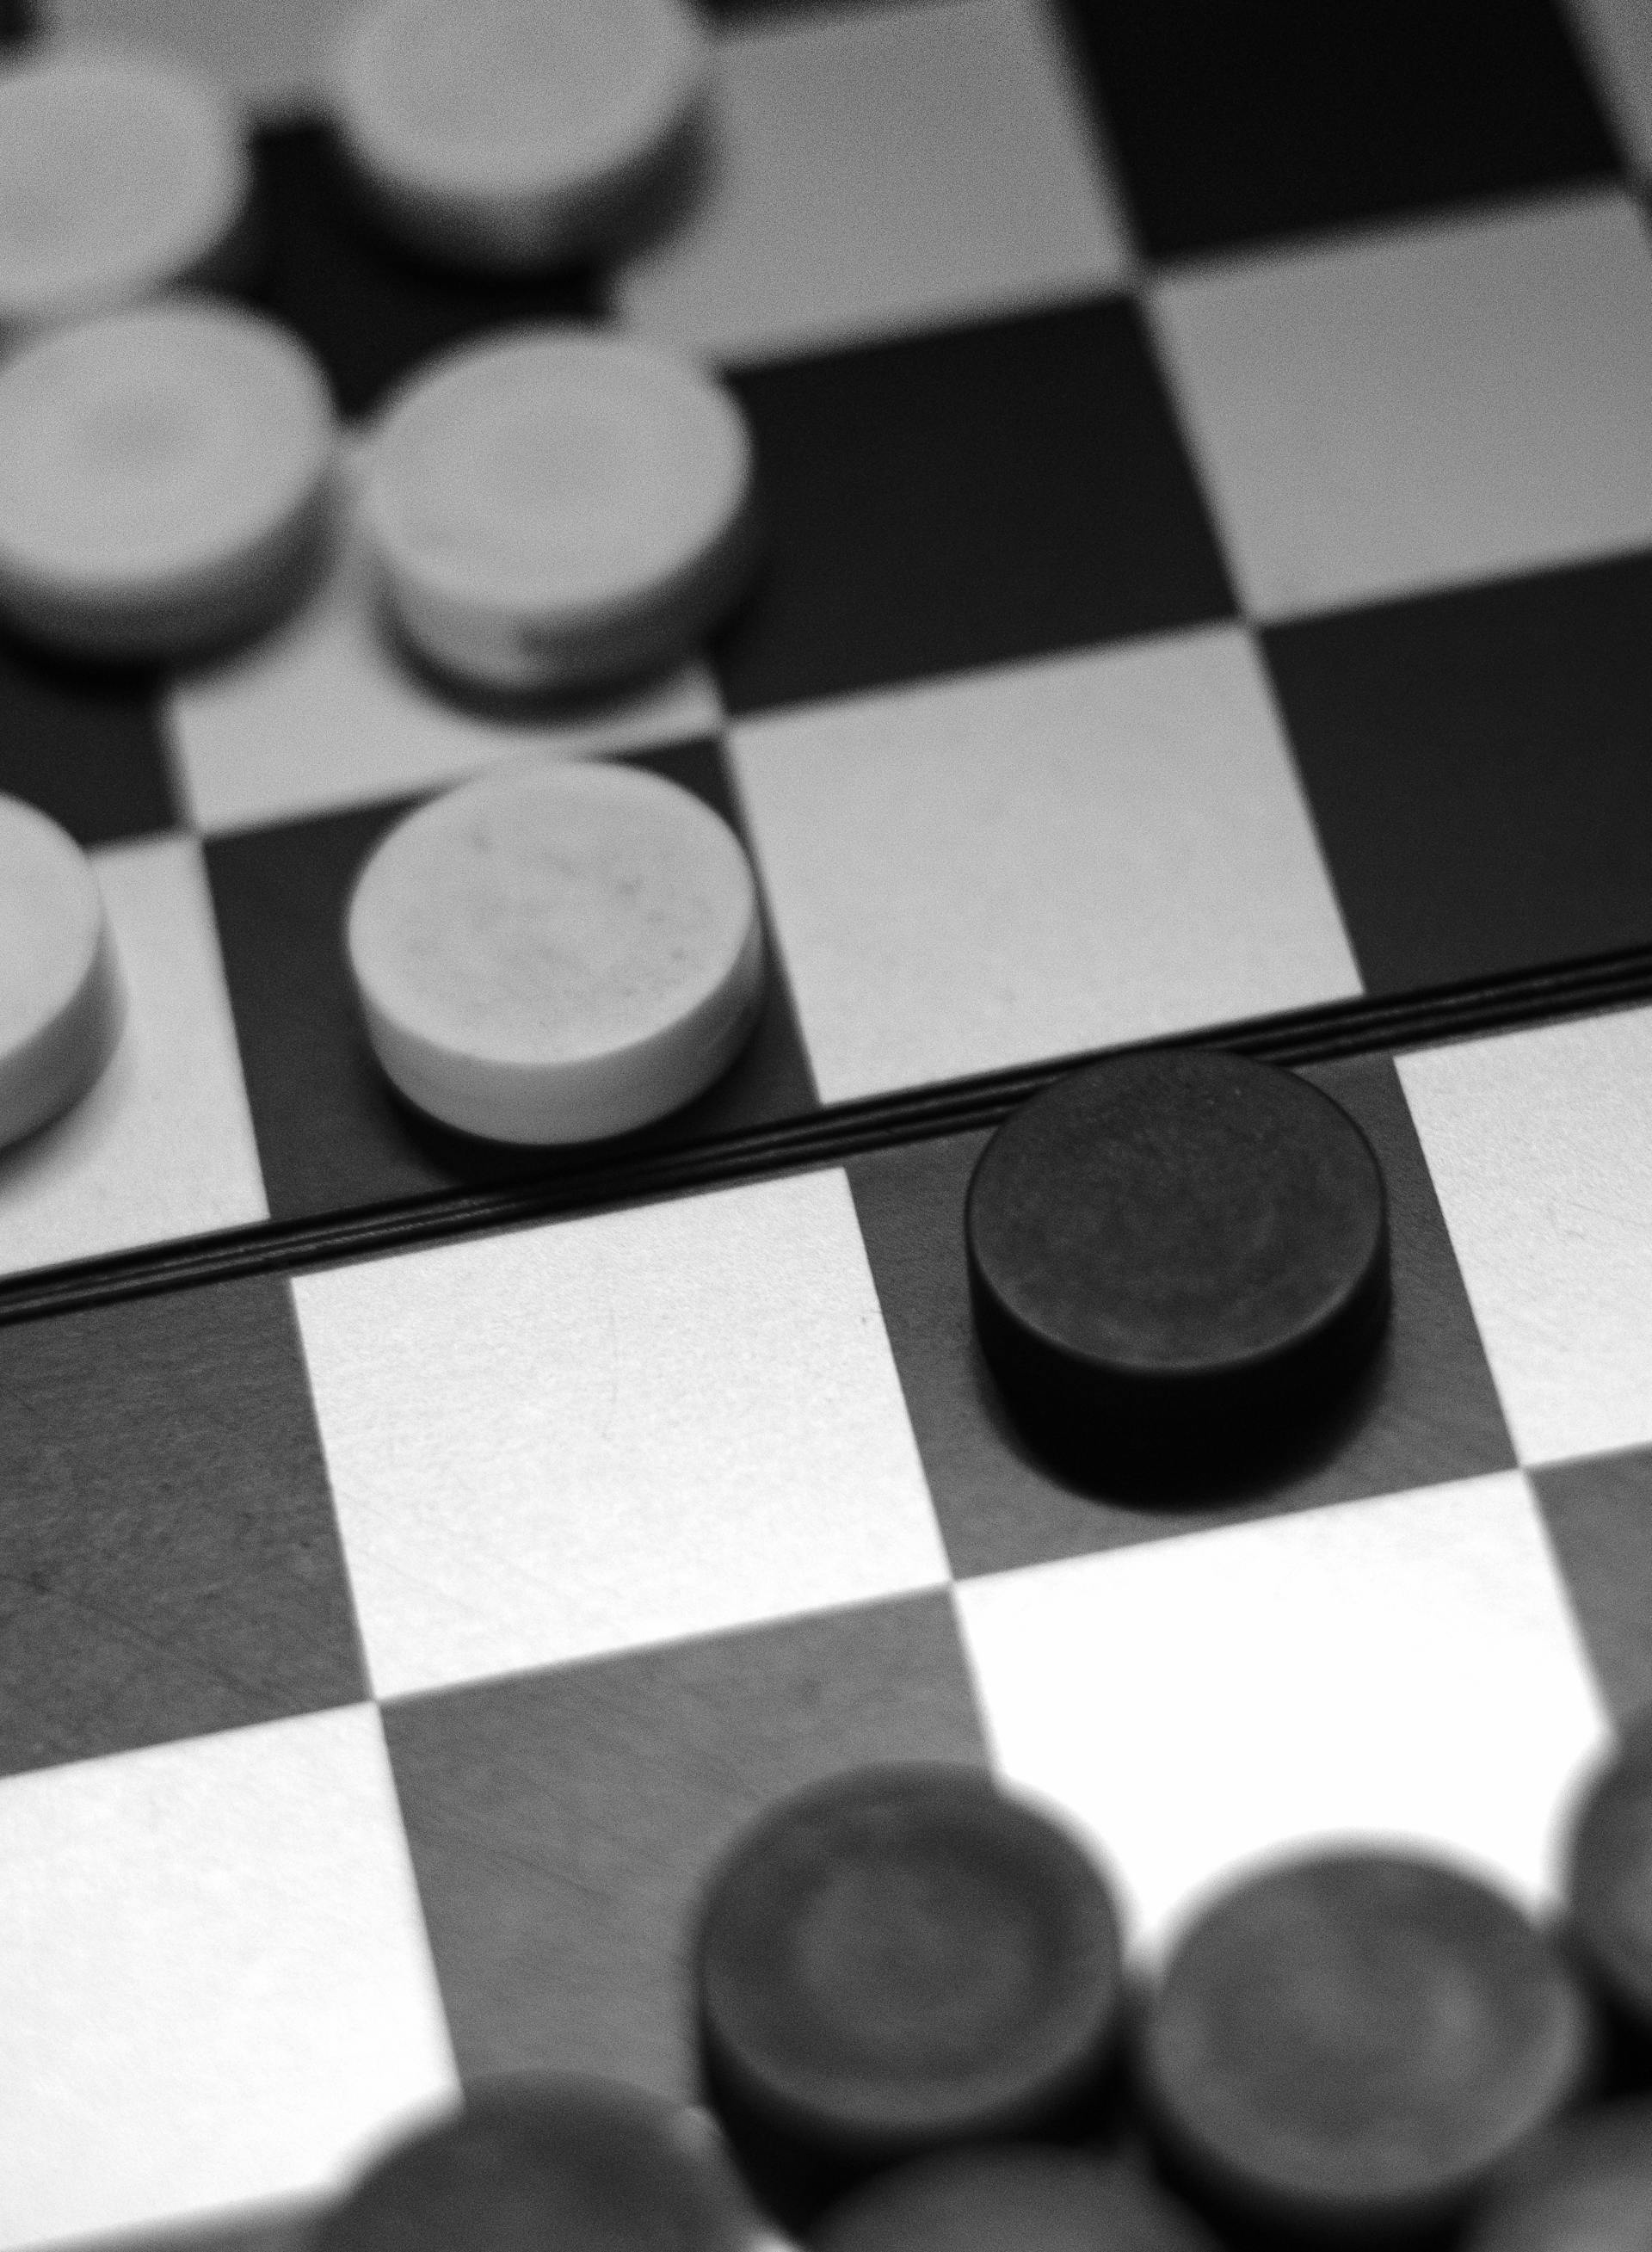 Black and white checkers | Source: Pexels